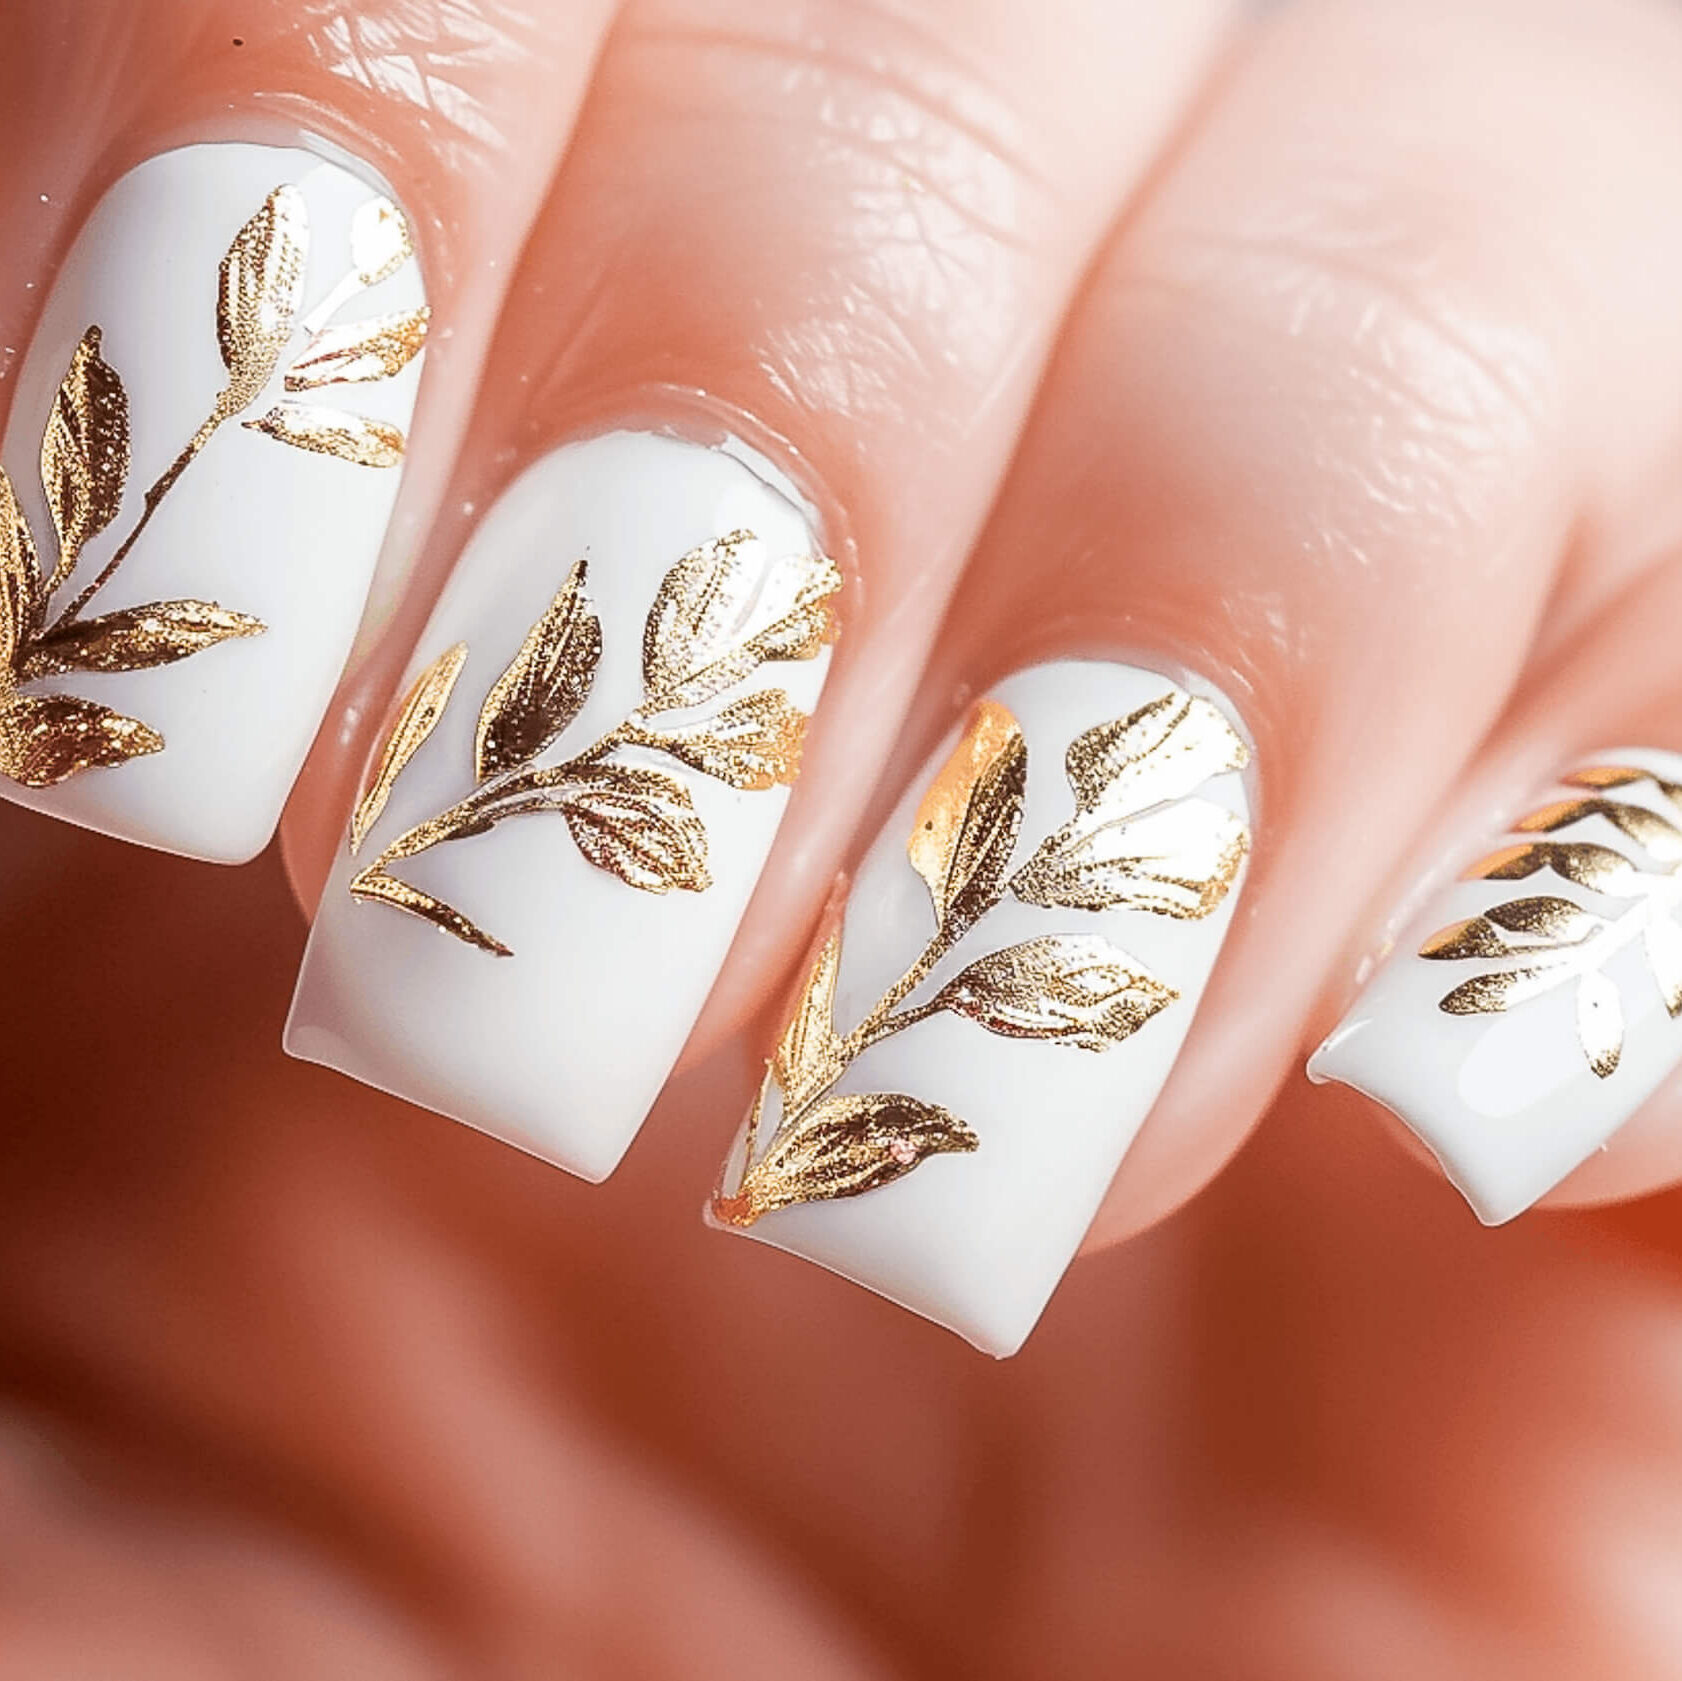 Nails showcasing delicate olive branch designs in gold over a white base. The olive branch is another historic symbol of peace and victory in Greece, and its delicate leaves and olives add a naturalistic element to the nails.